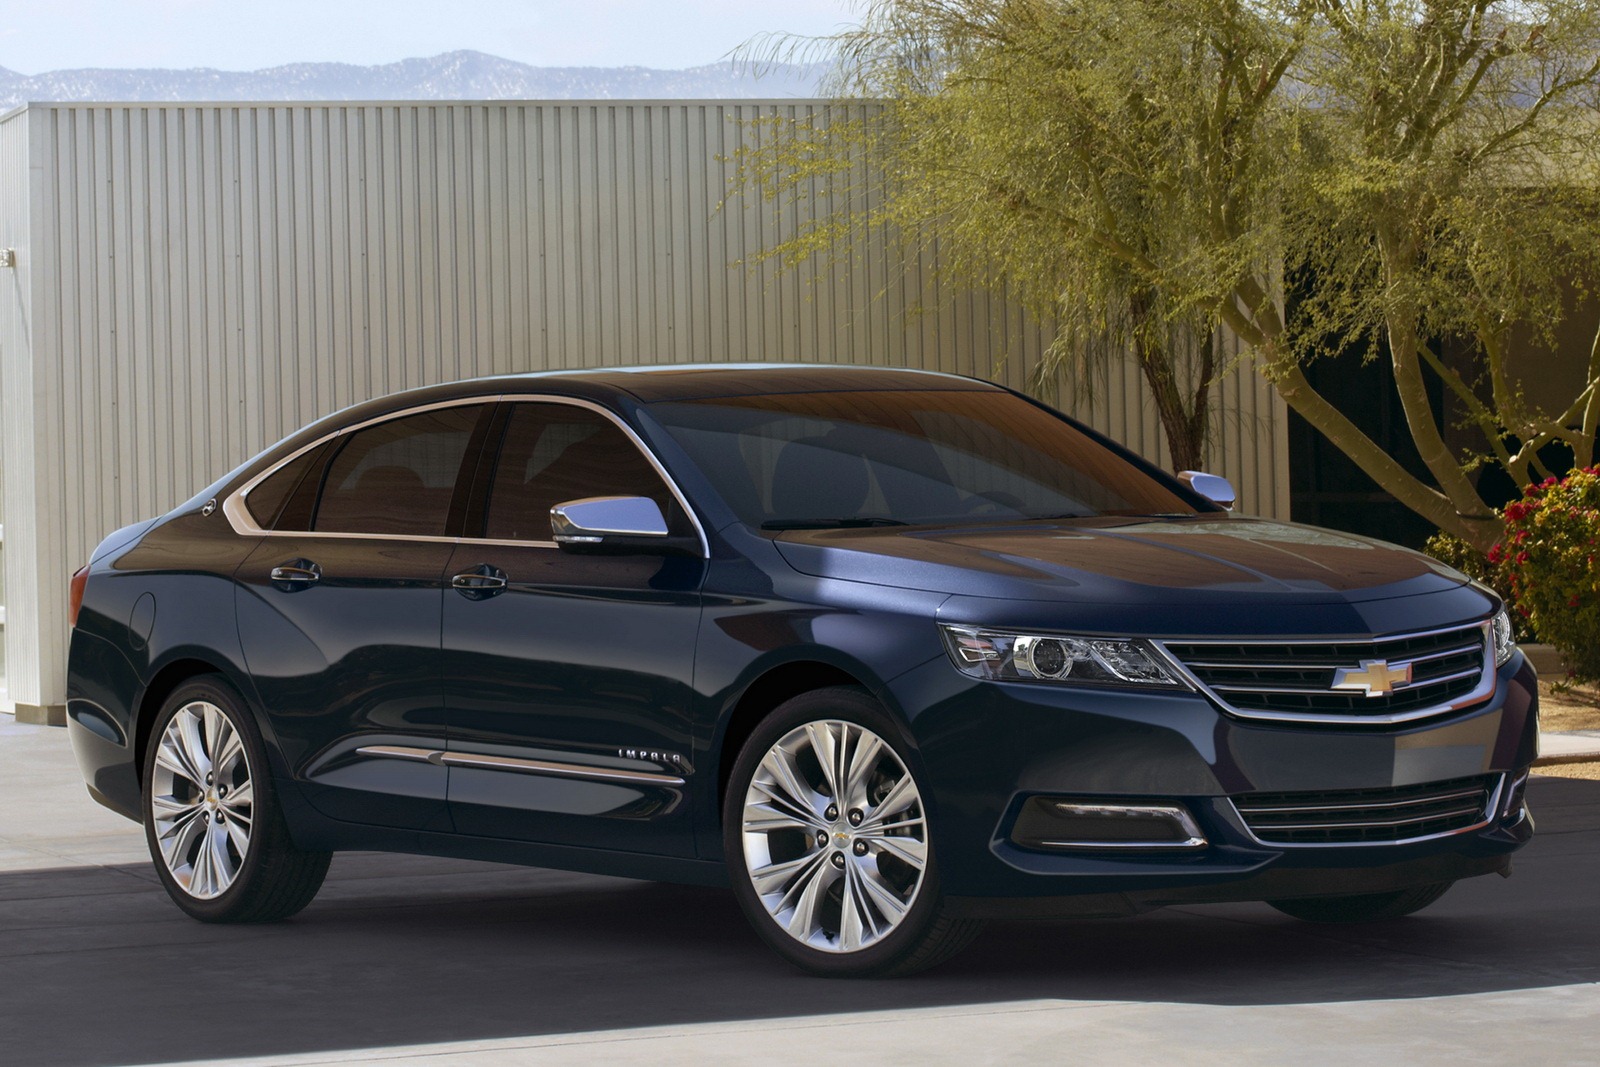 Think Of The 2014 Chevrolet Impala As A Cadillac Xts For The